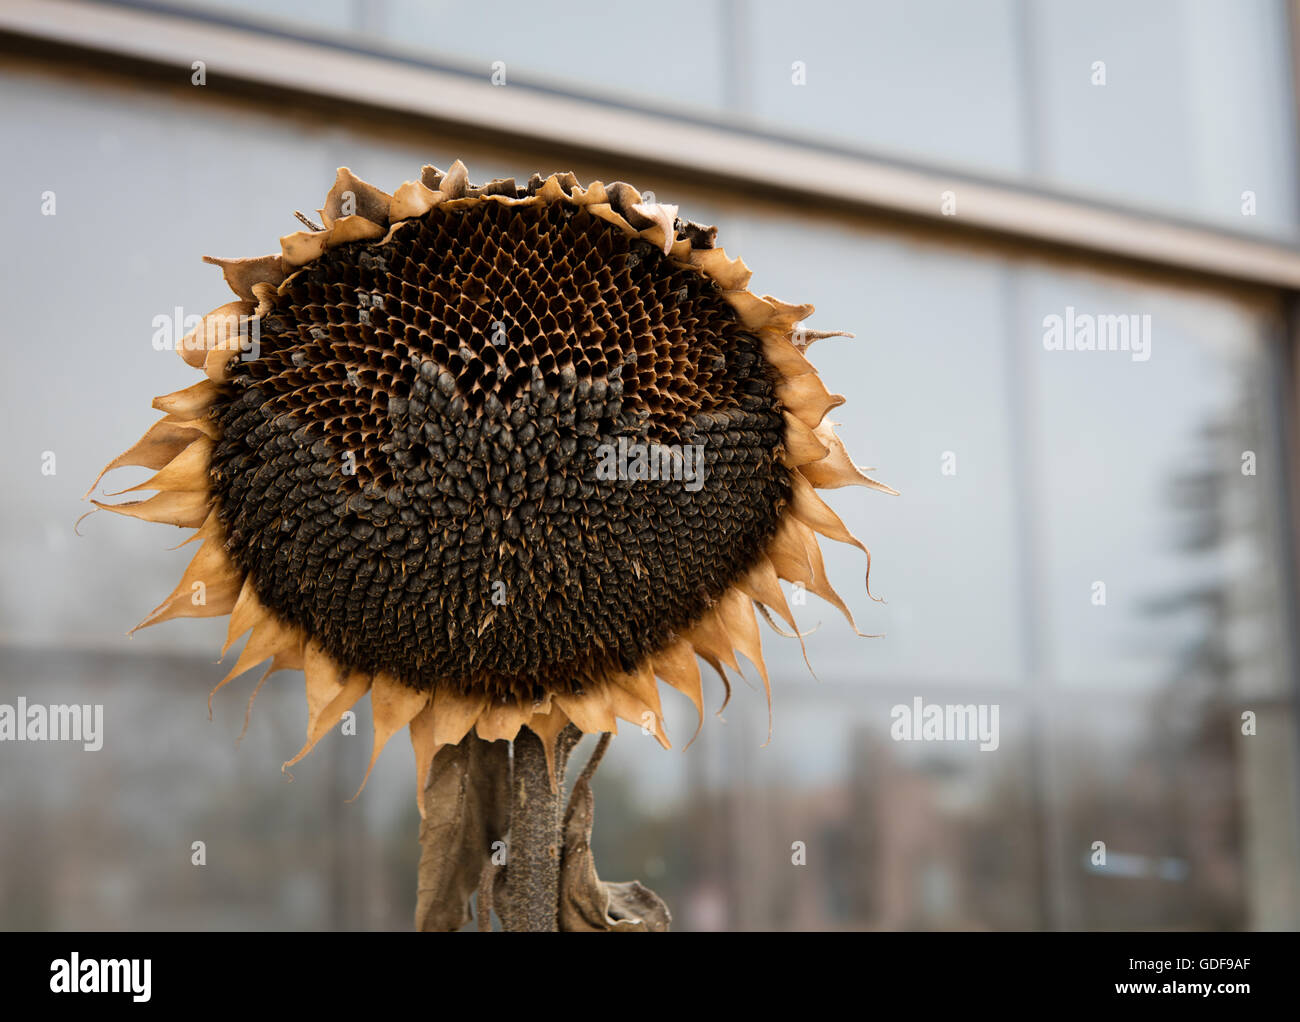 An old drying sunflower outside on the stalk Stock Photo